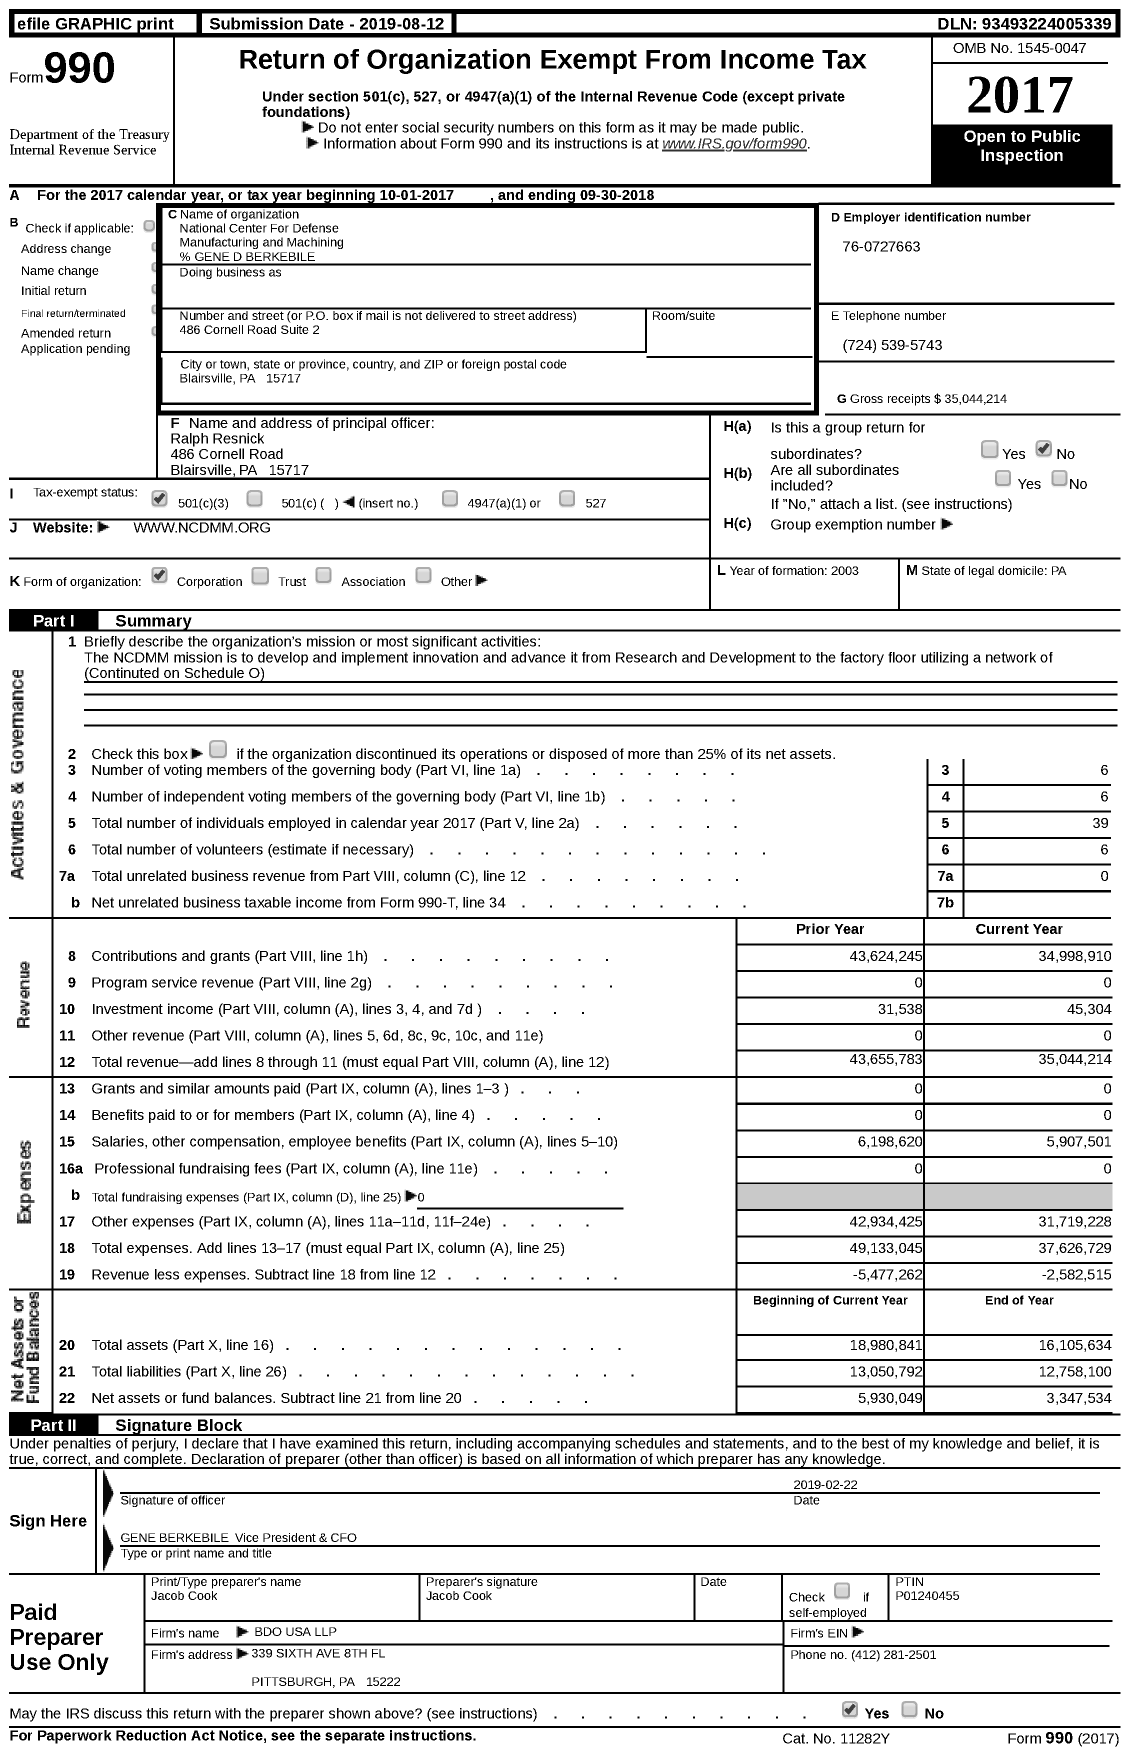 Image of first page of 2017 Form 990 for National Center for Defense Manufacturing and Machining (NCDMM)